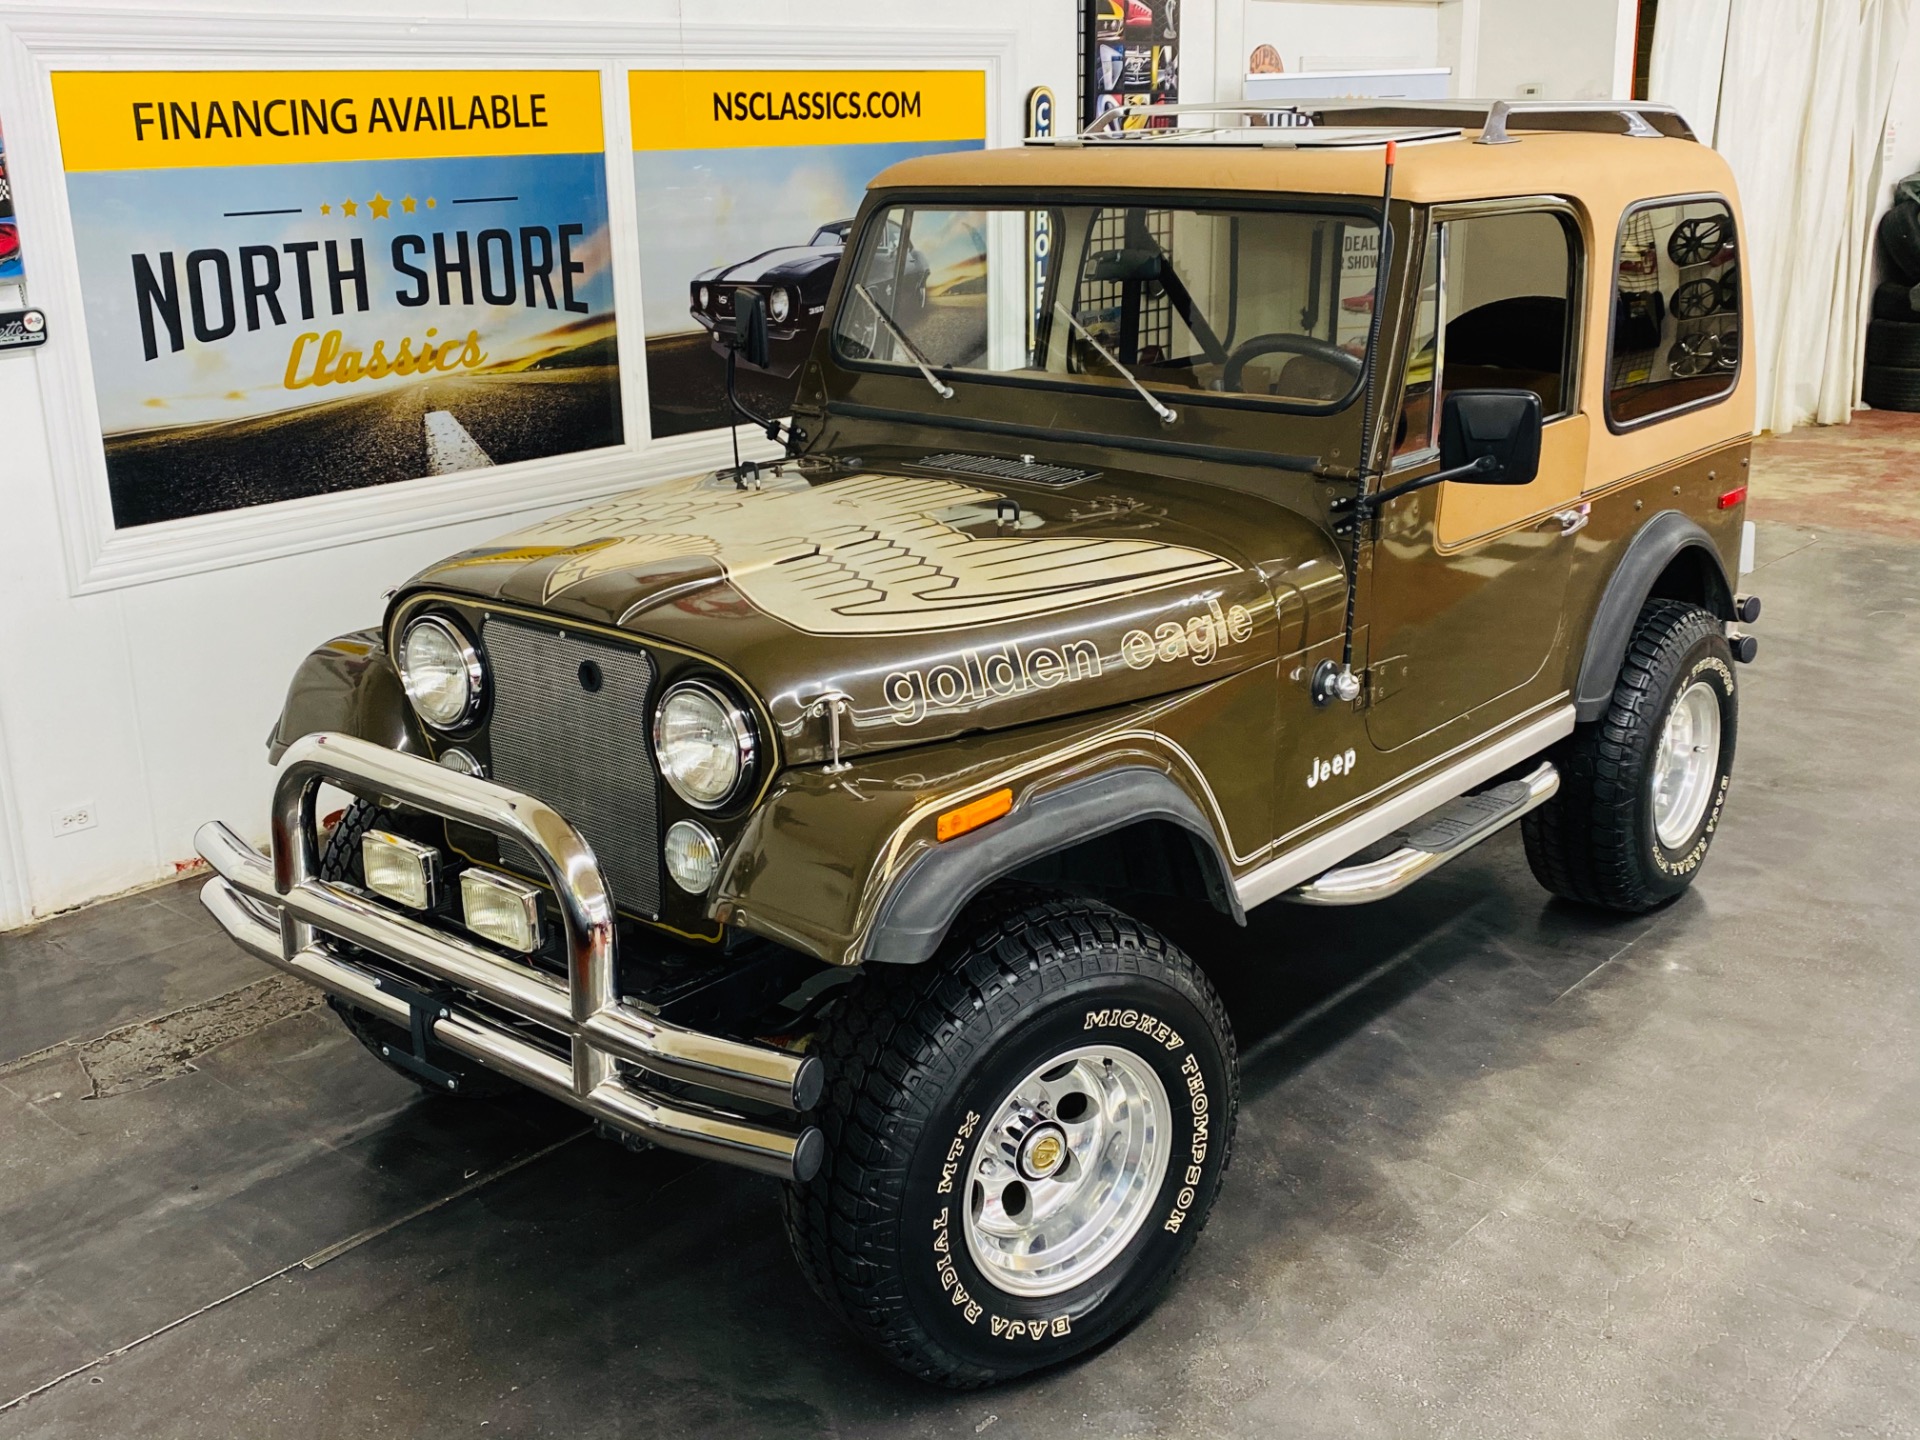 Used 1978 Jeep CJ-7 - GOLDEN EAGLE - LEVIS EDITION - FACTORY V8 ENGINE -  SEE VIDEO For Sale (Sold) | North Shore Classics Stock #789388NSC